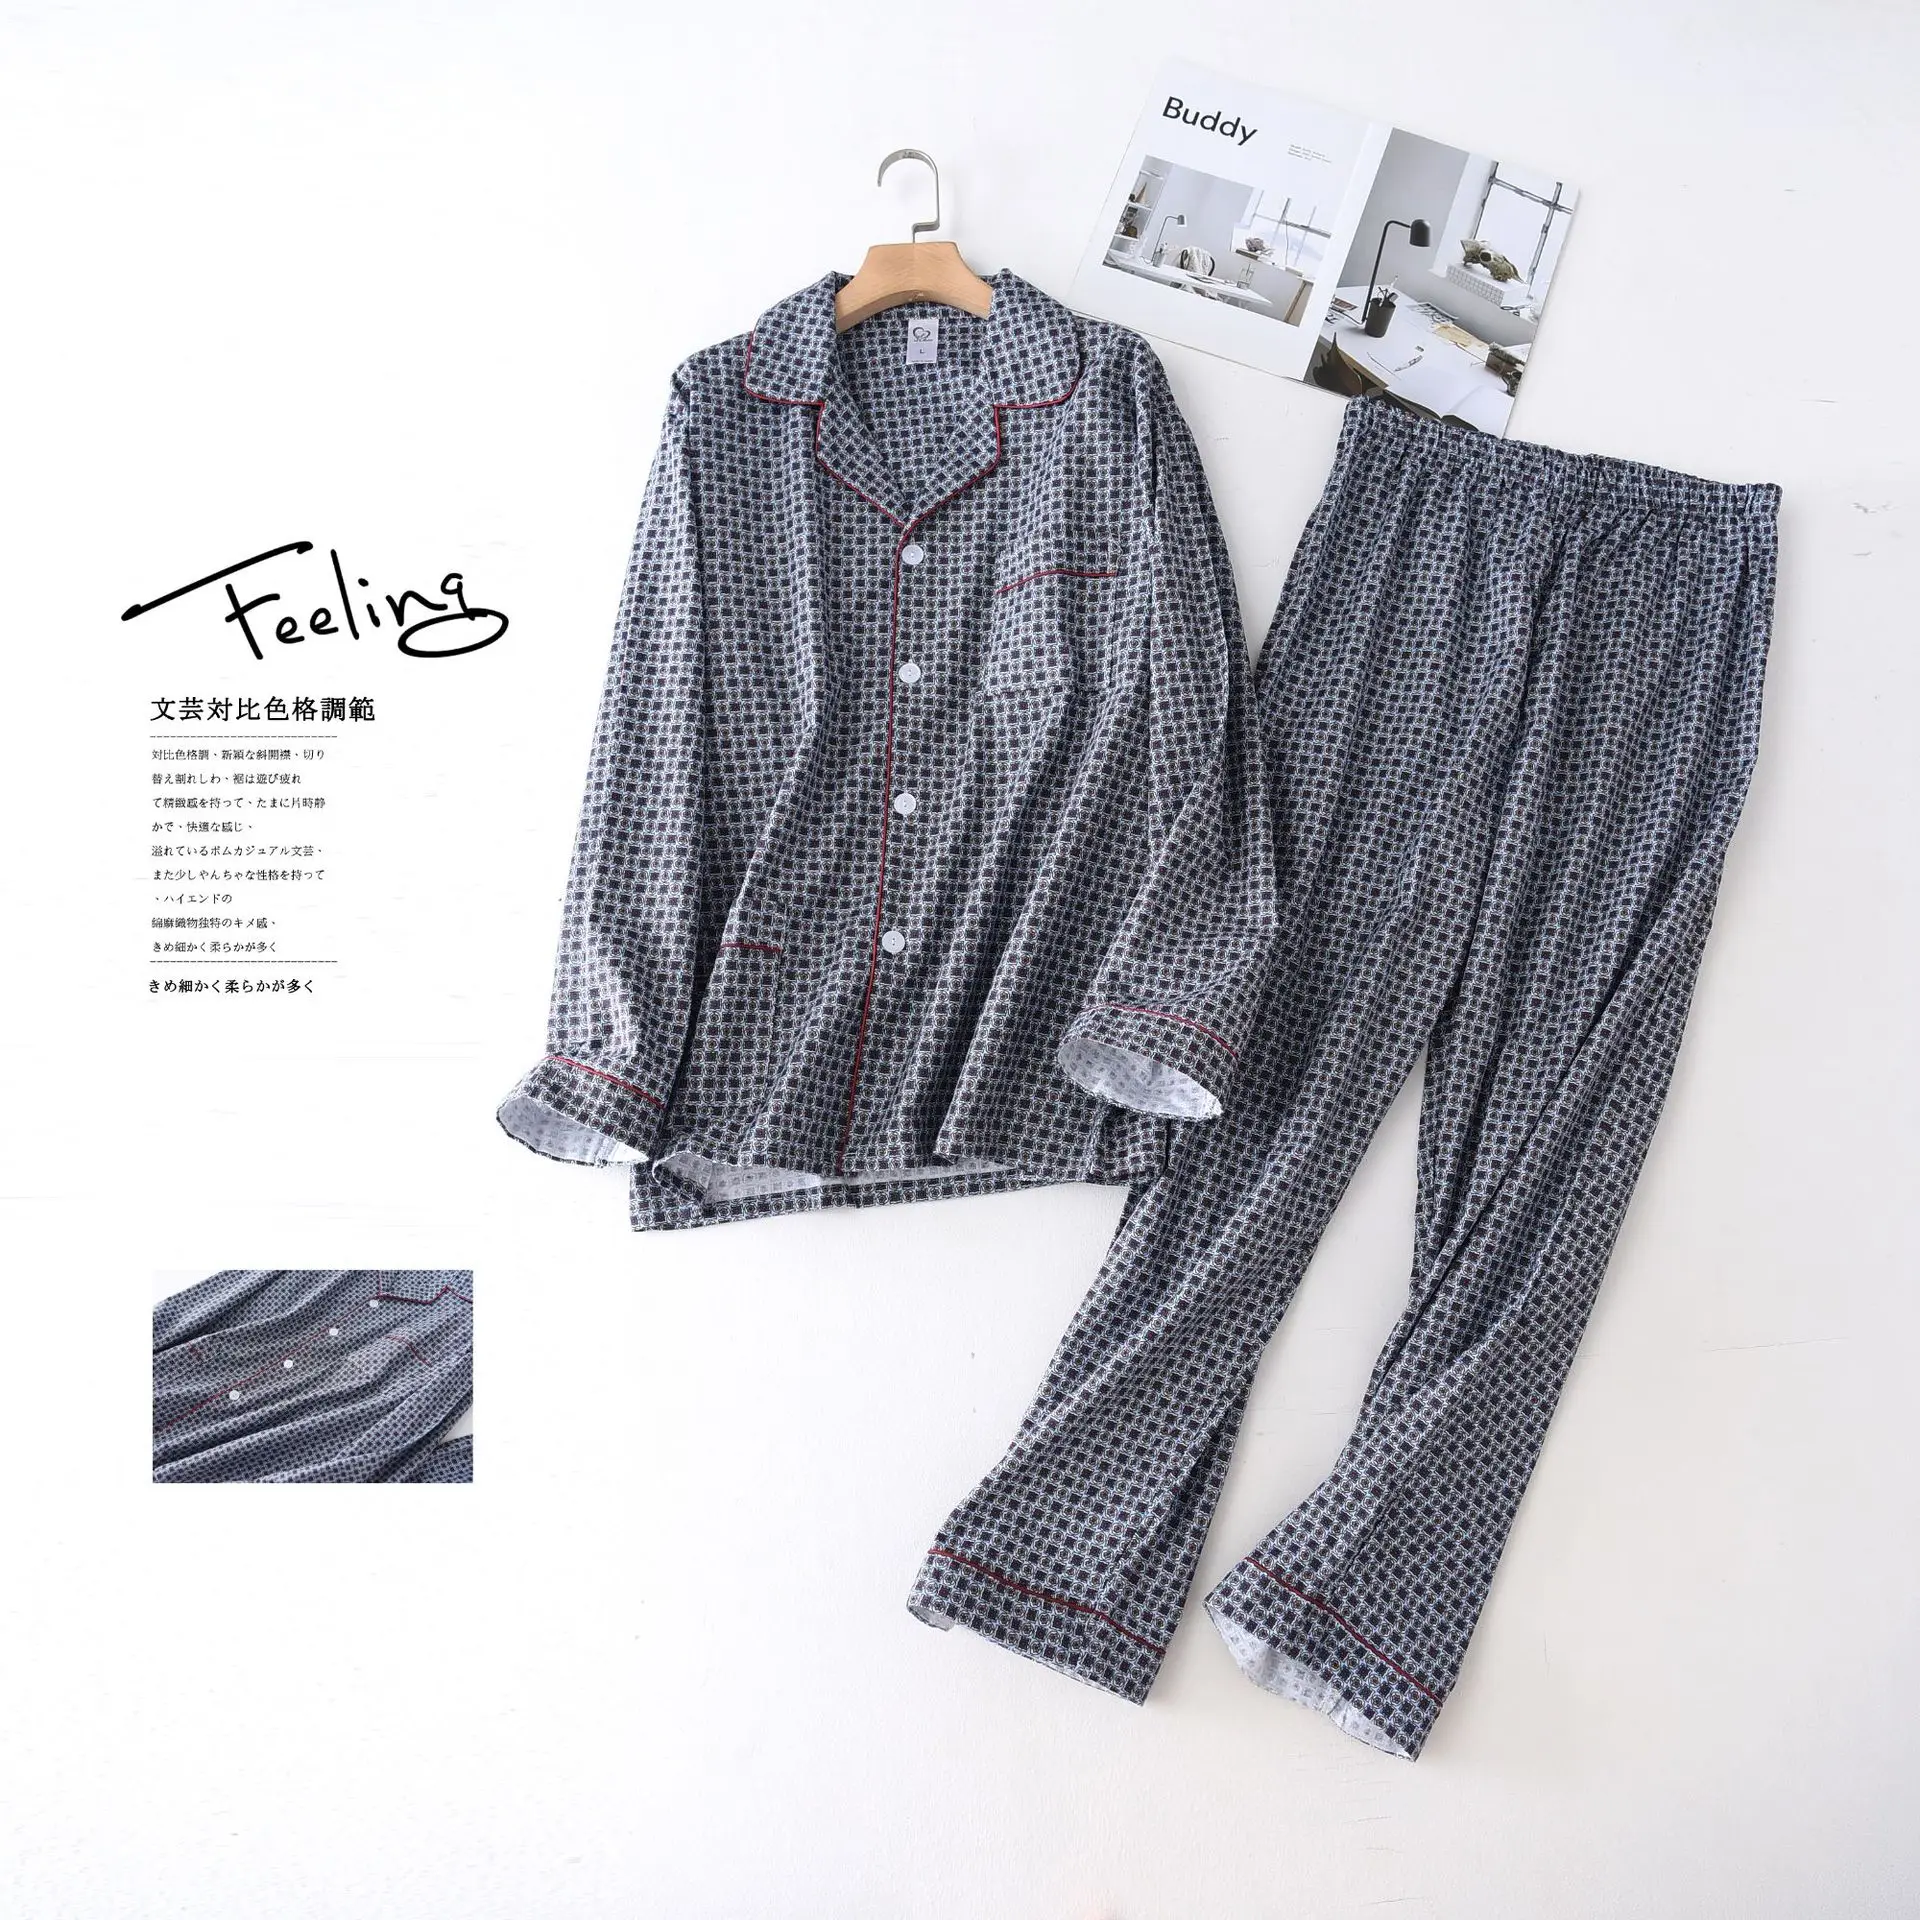 black silk pajamas Spring Autumn and Winter Men's Pajamas Long-sleeved Trousers Suit Cotton Brushed Cloth Homewear Men's Pajamas Set cotton pajamas for men